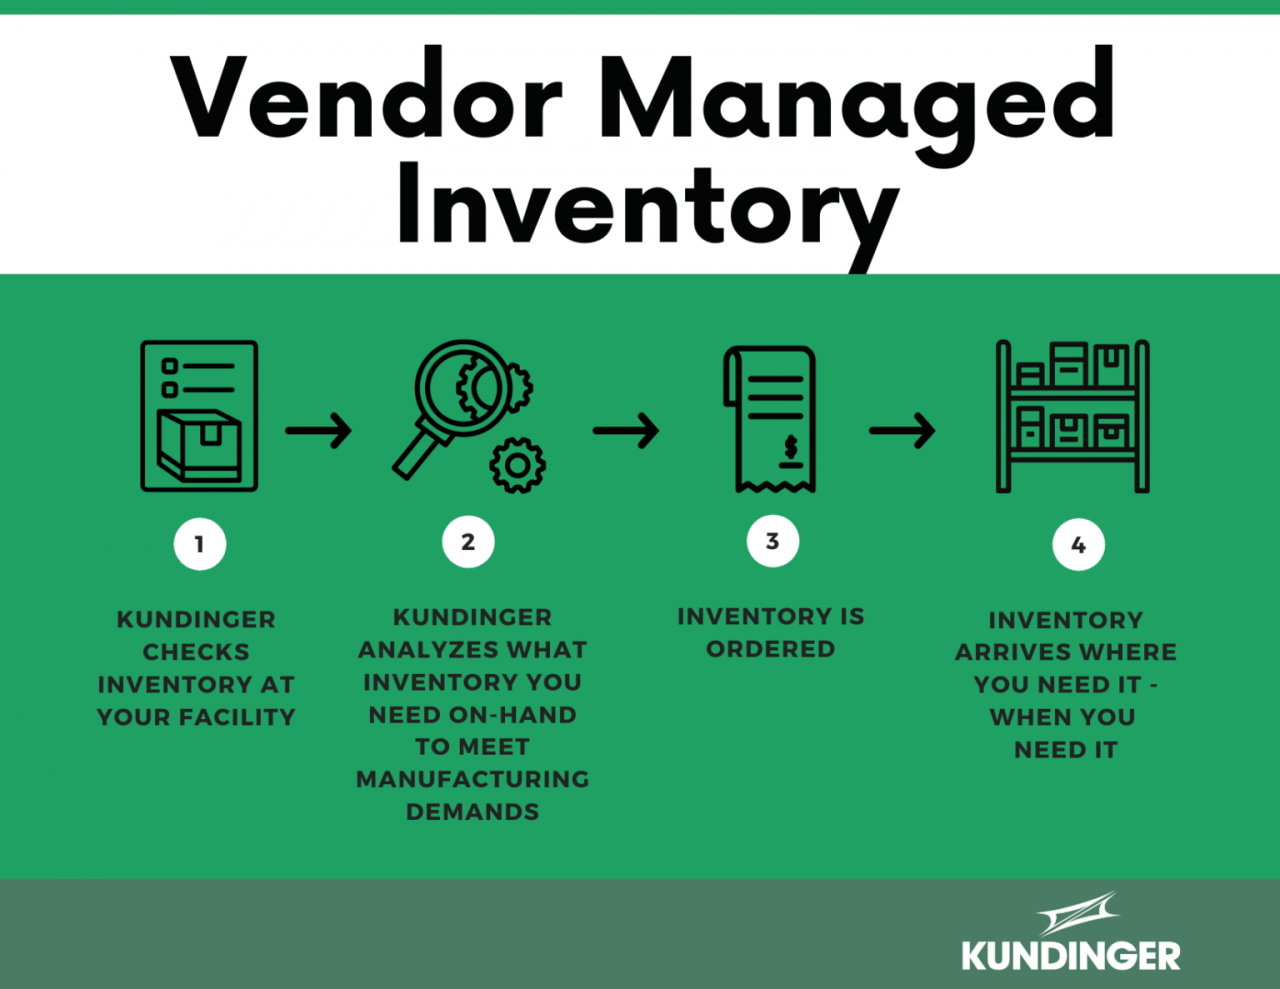 A vendor managed inventory system refers to an